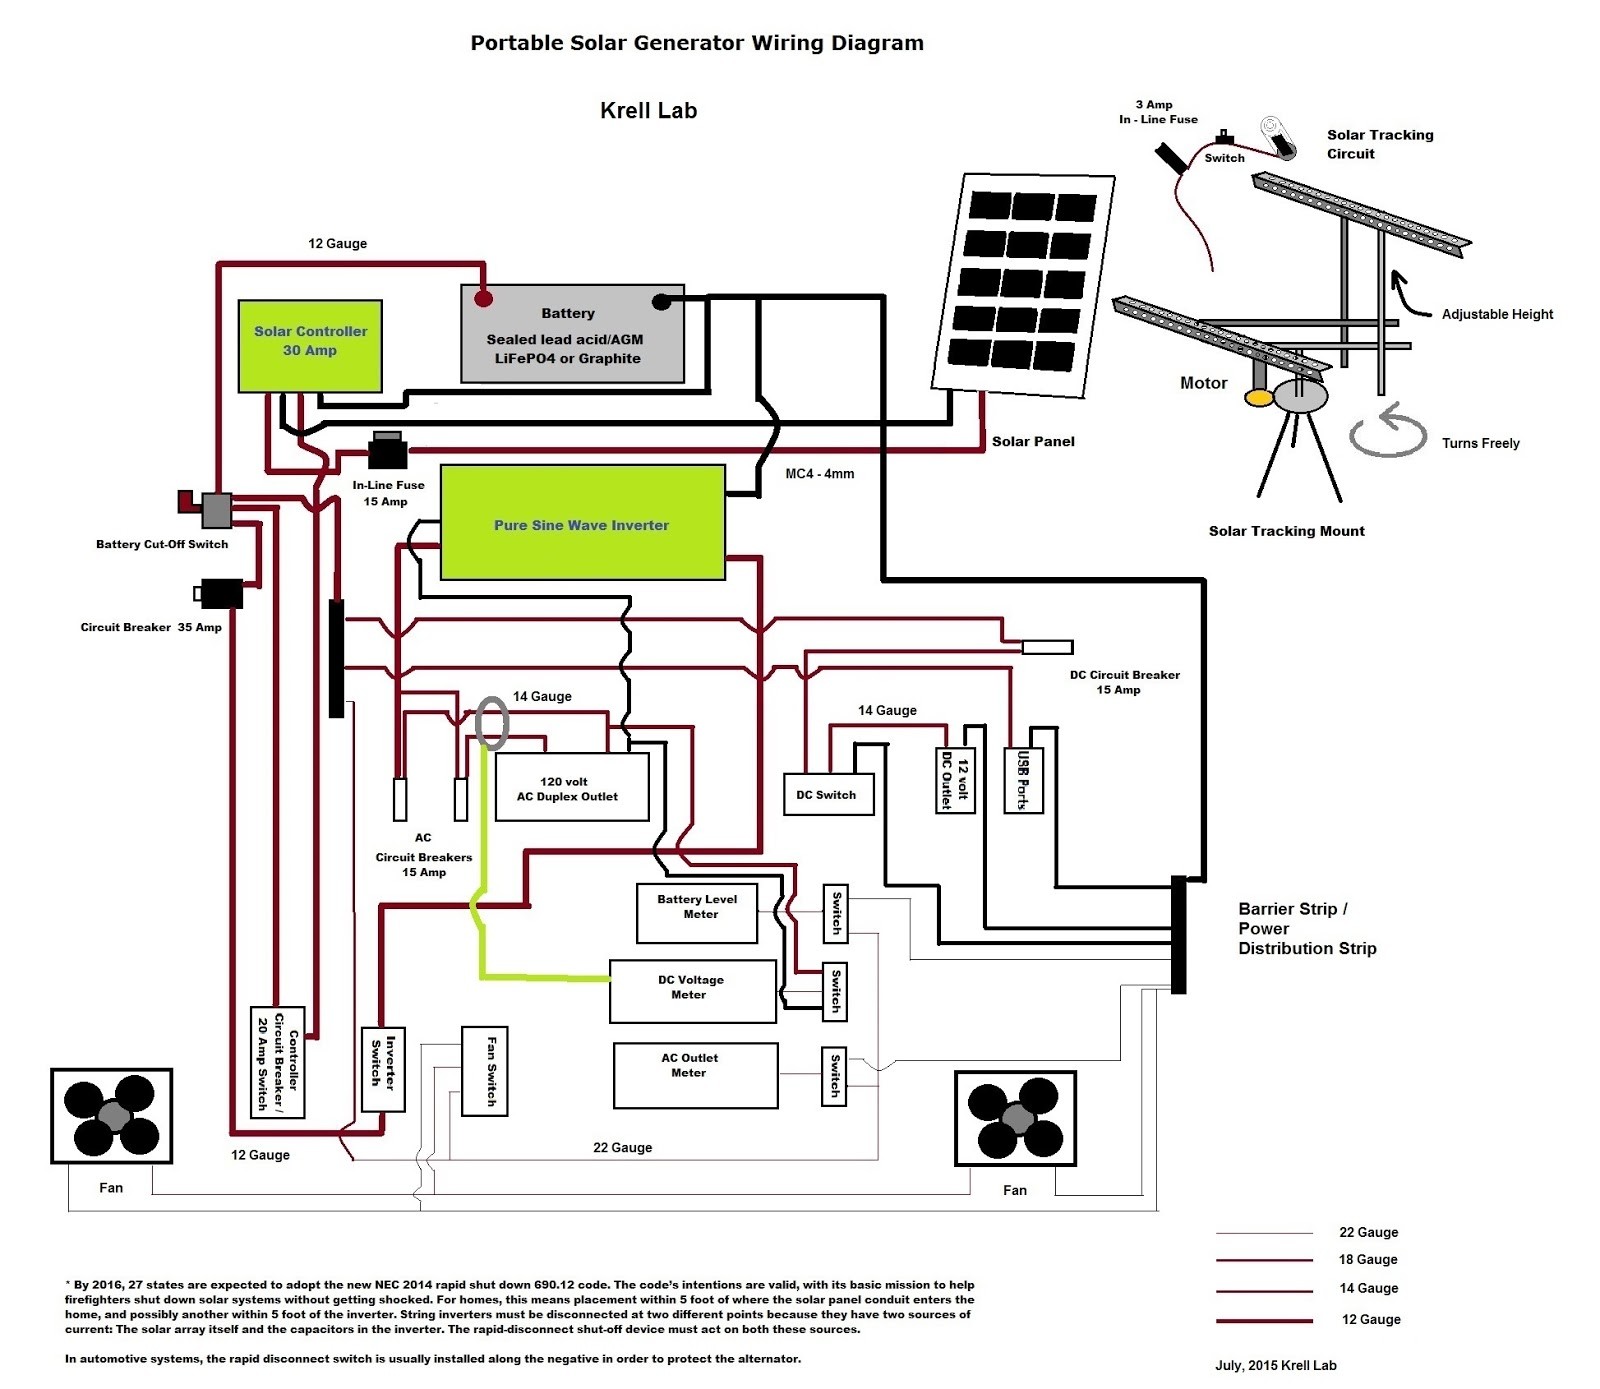 Portable Solar Generator In A Battery Box Wiring Schematic The Krell Lab